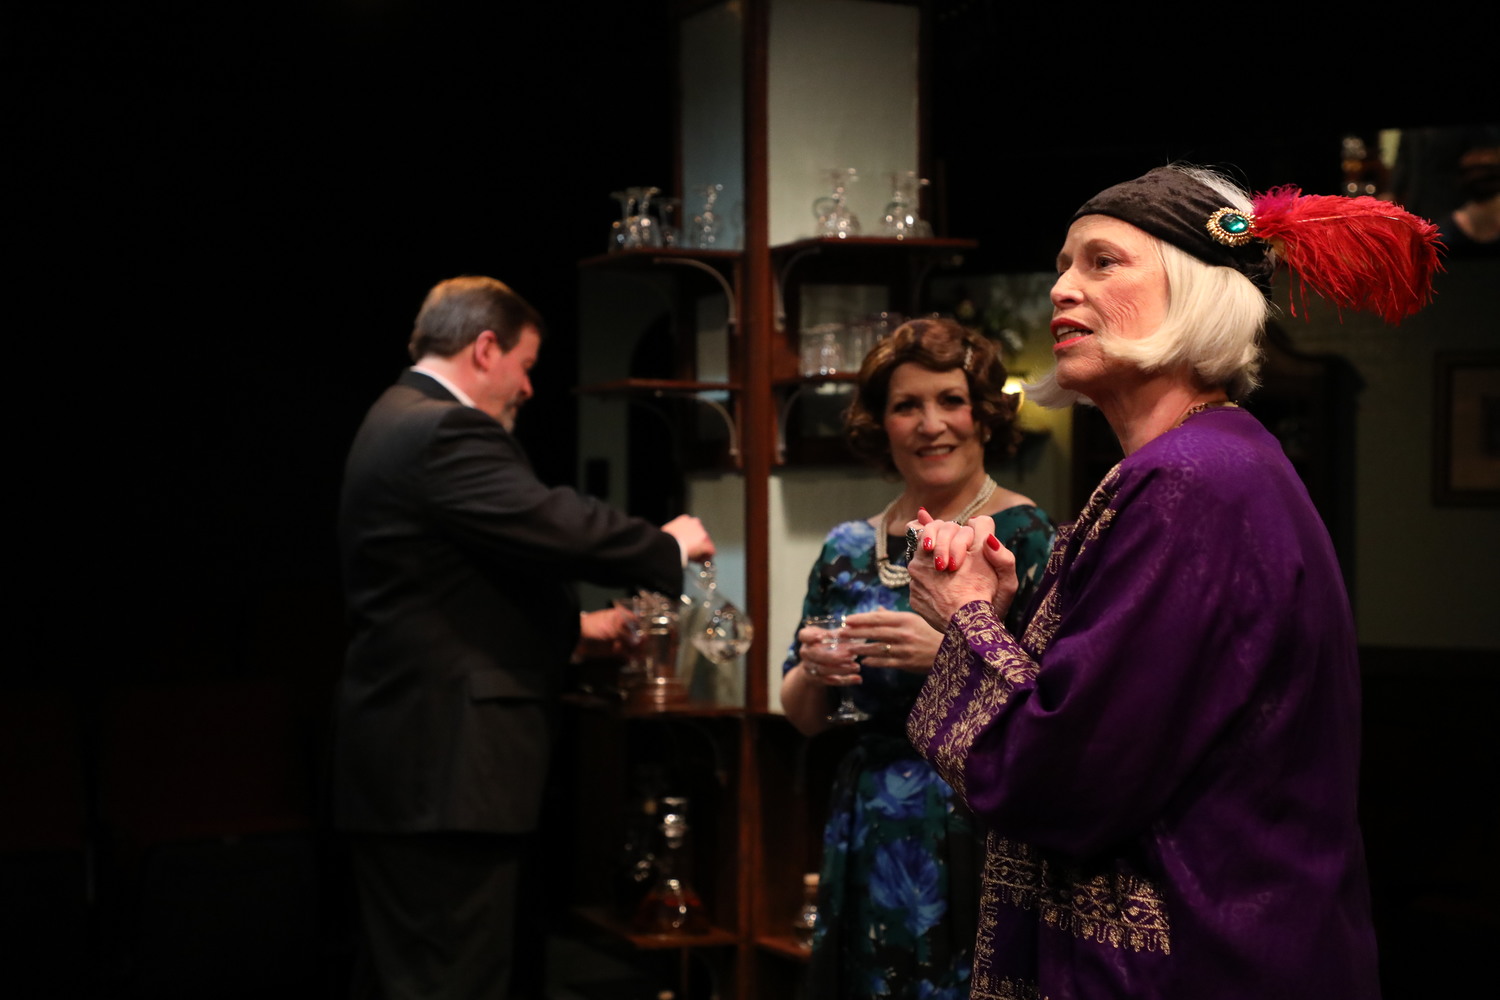 Production Photos from Blithe Spirit at Spotlighters Theatre
www.spotlighters.org/BlitheSpirit